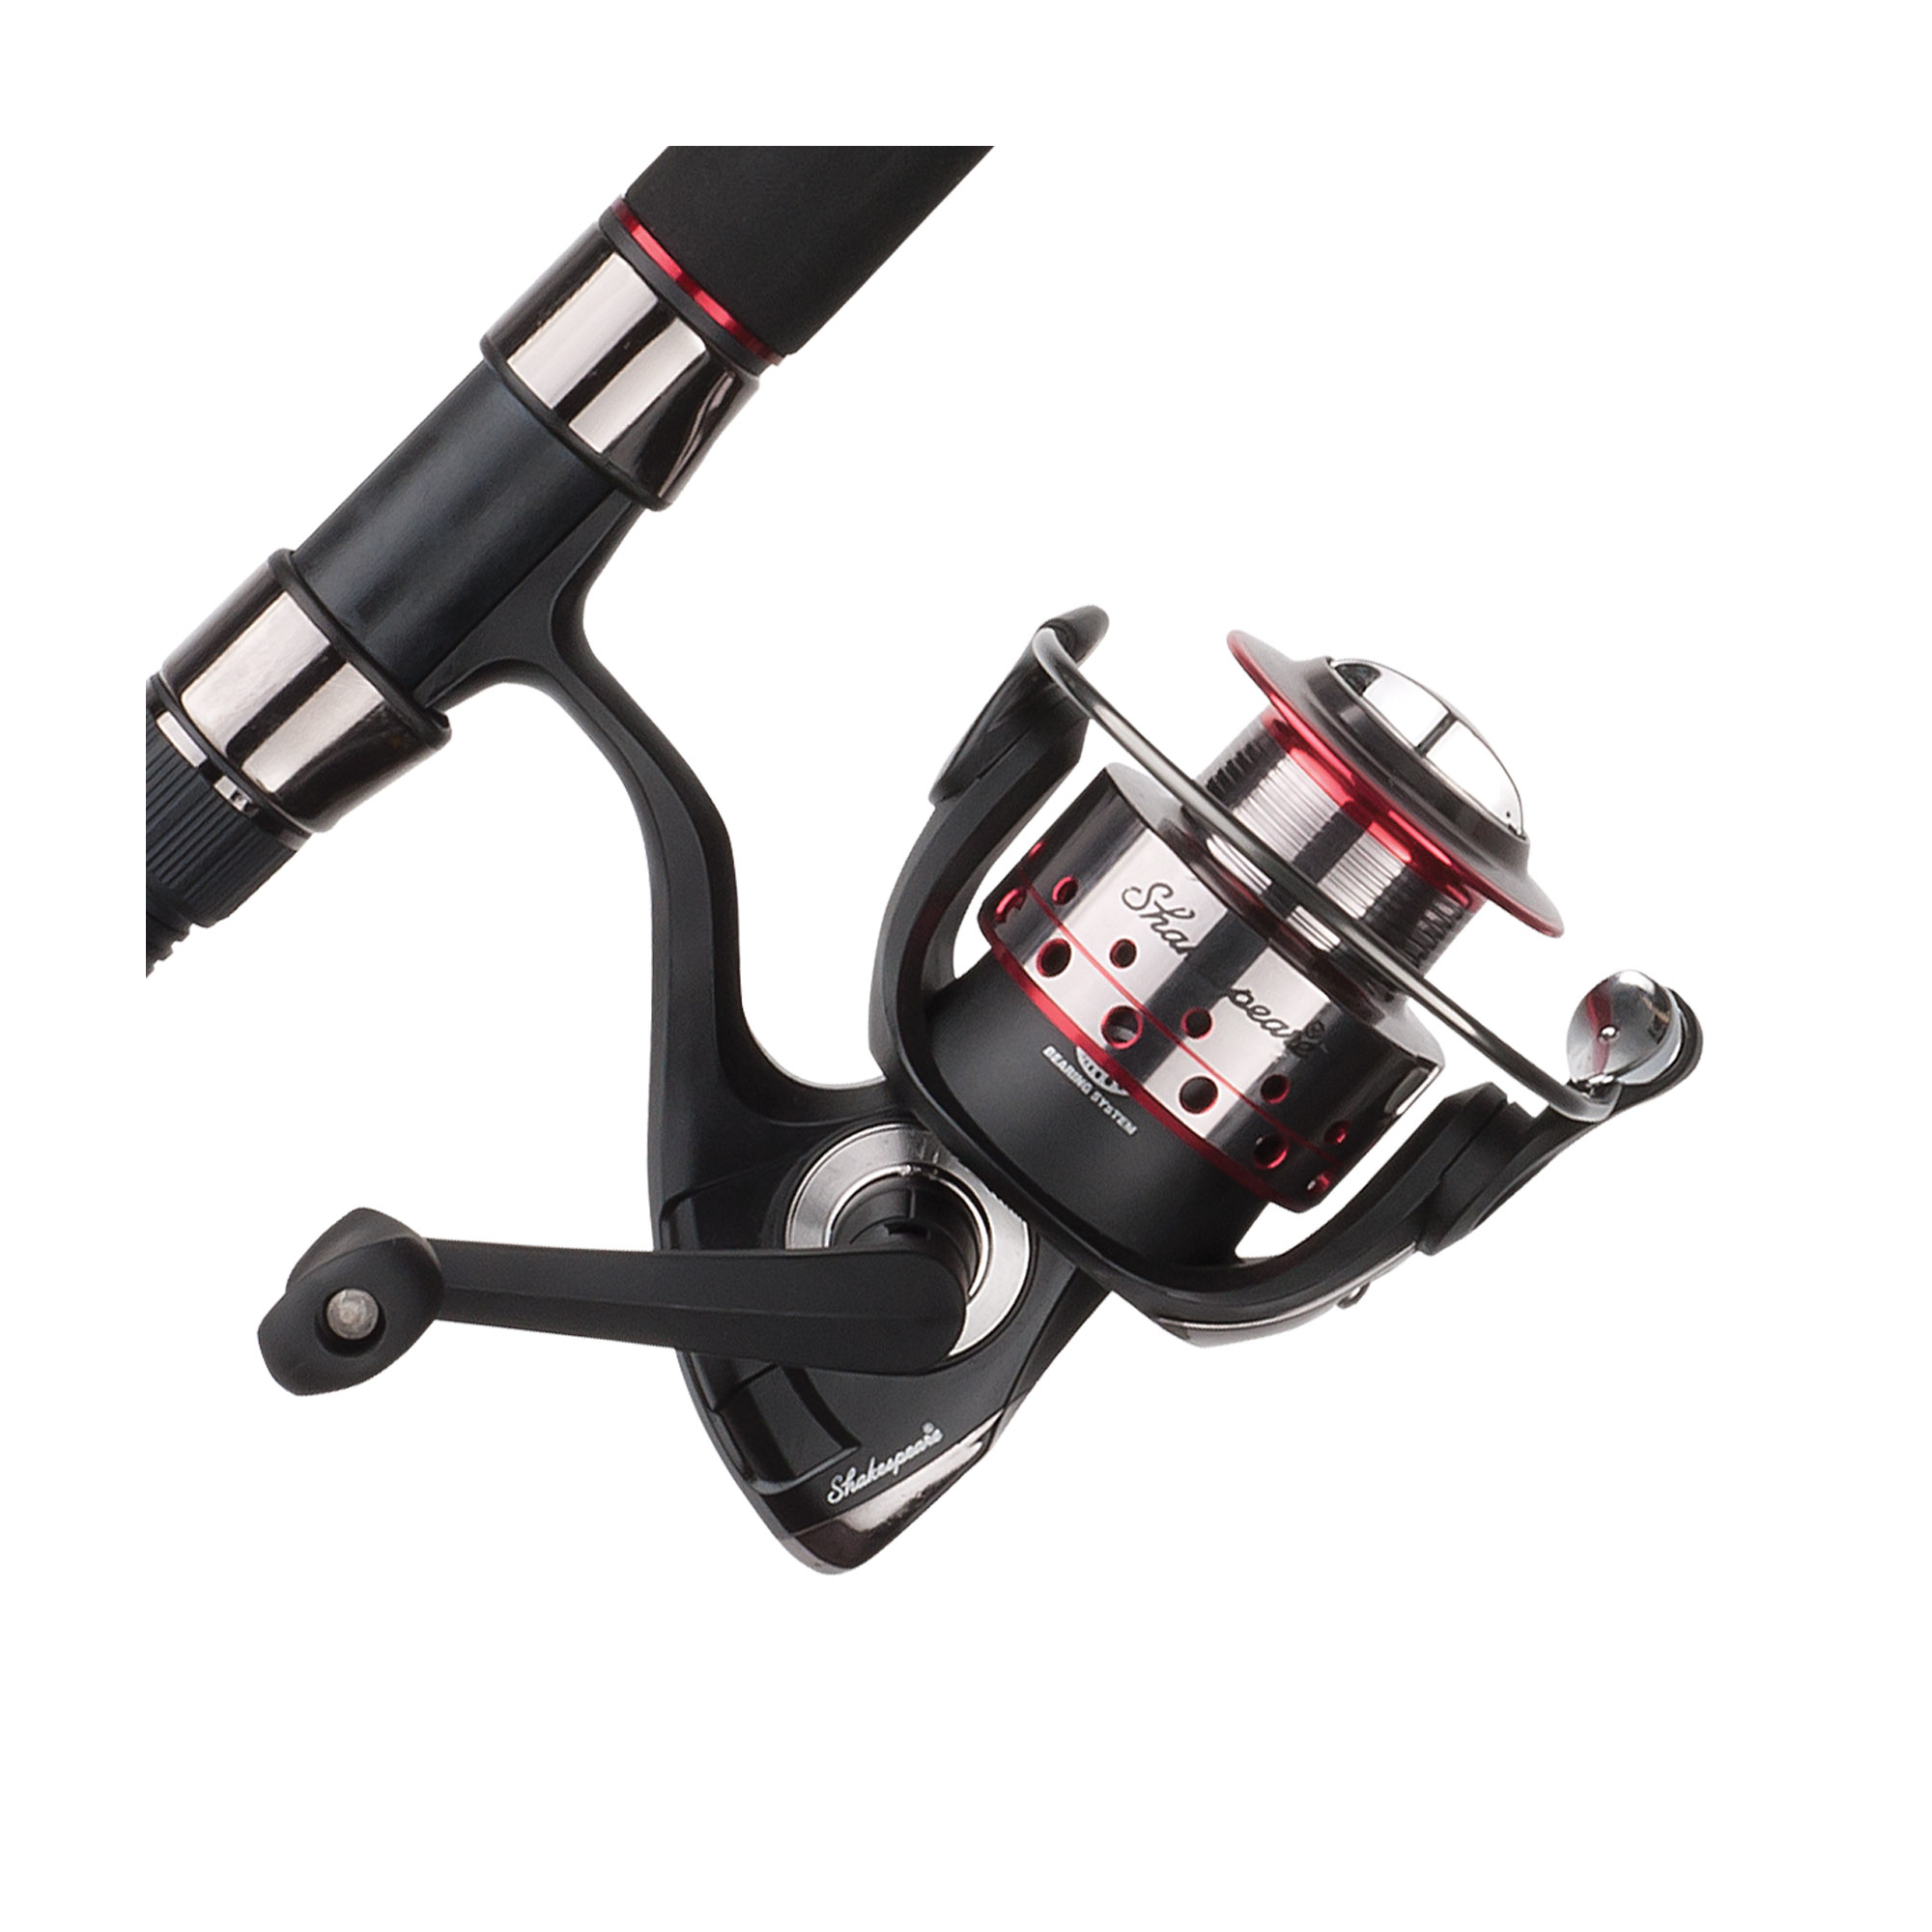 Shakespeare Ugly Stik GX2 Spinning Reel and Fishing Rod Combo thebookongonefishing on sale for a limited time for $44.99 buy today!